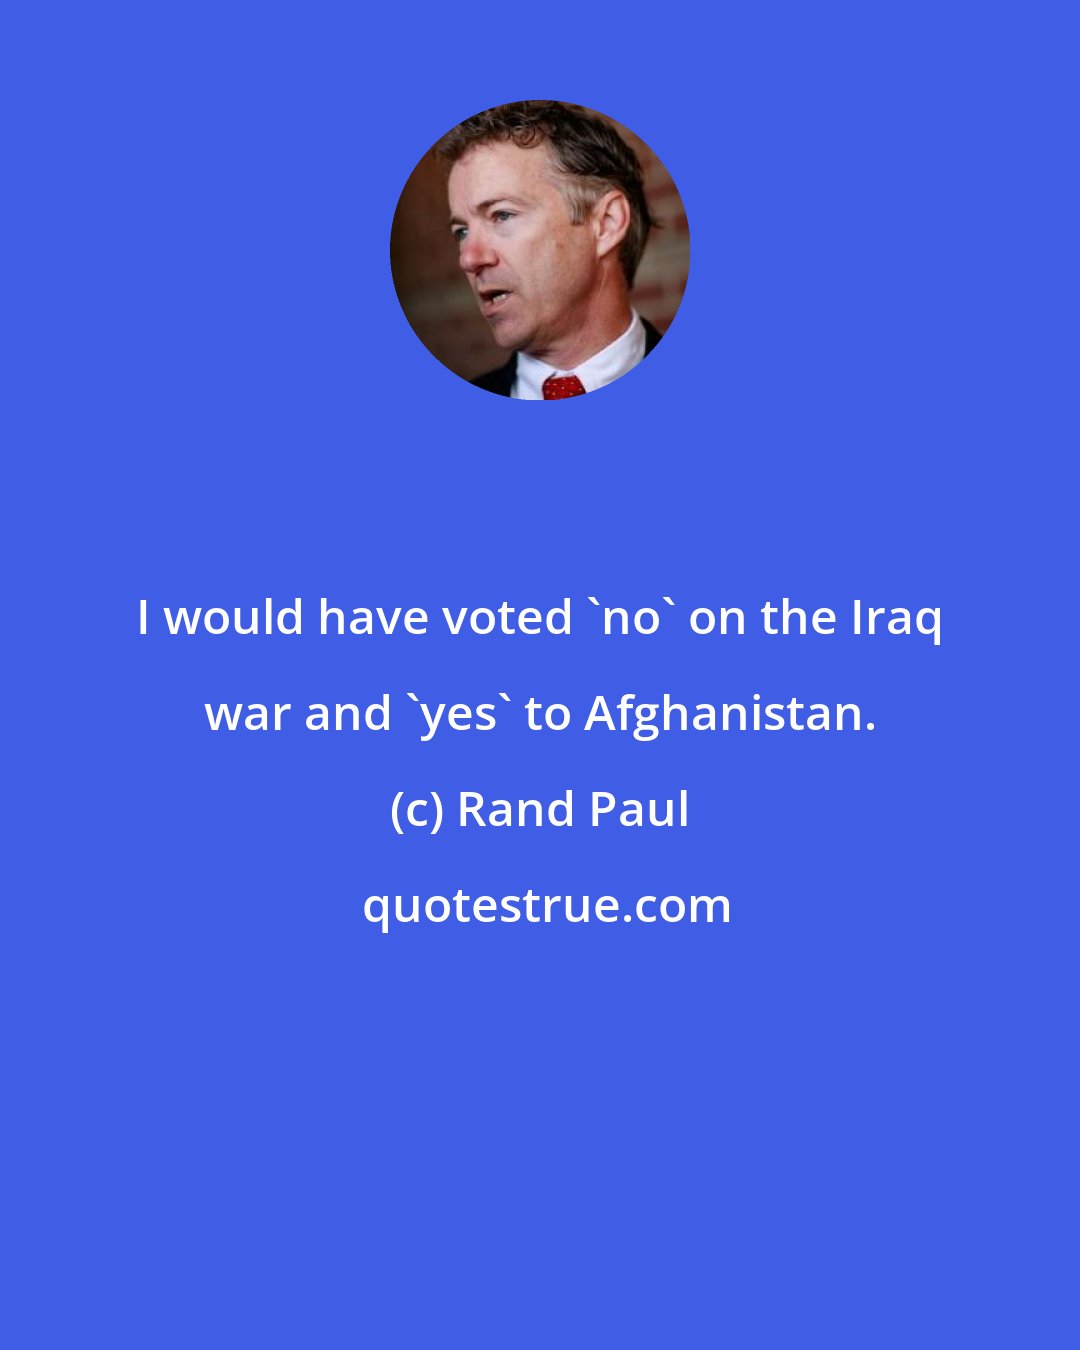 Rand Paul: I would have voted 'no' on the Iraq war and 'yes' to Afghanistan.